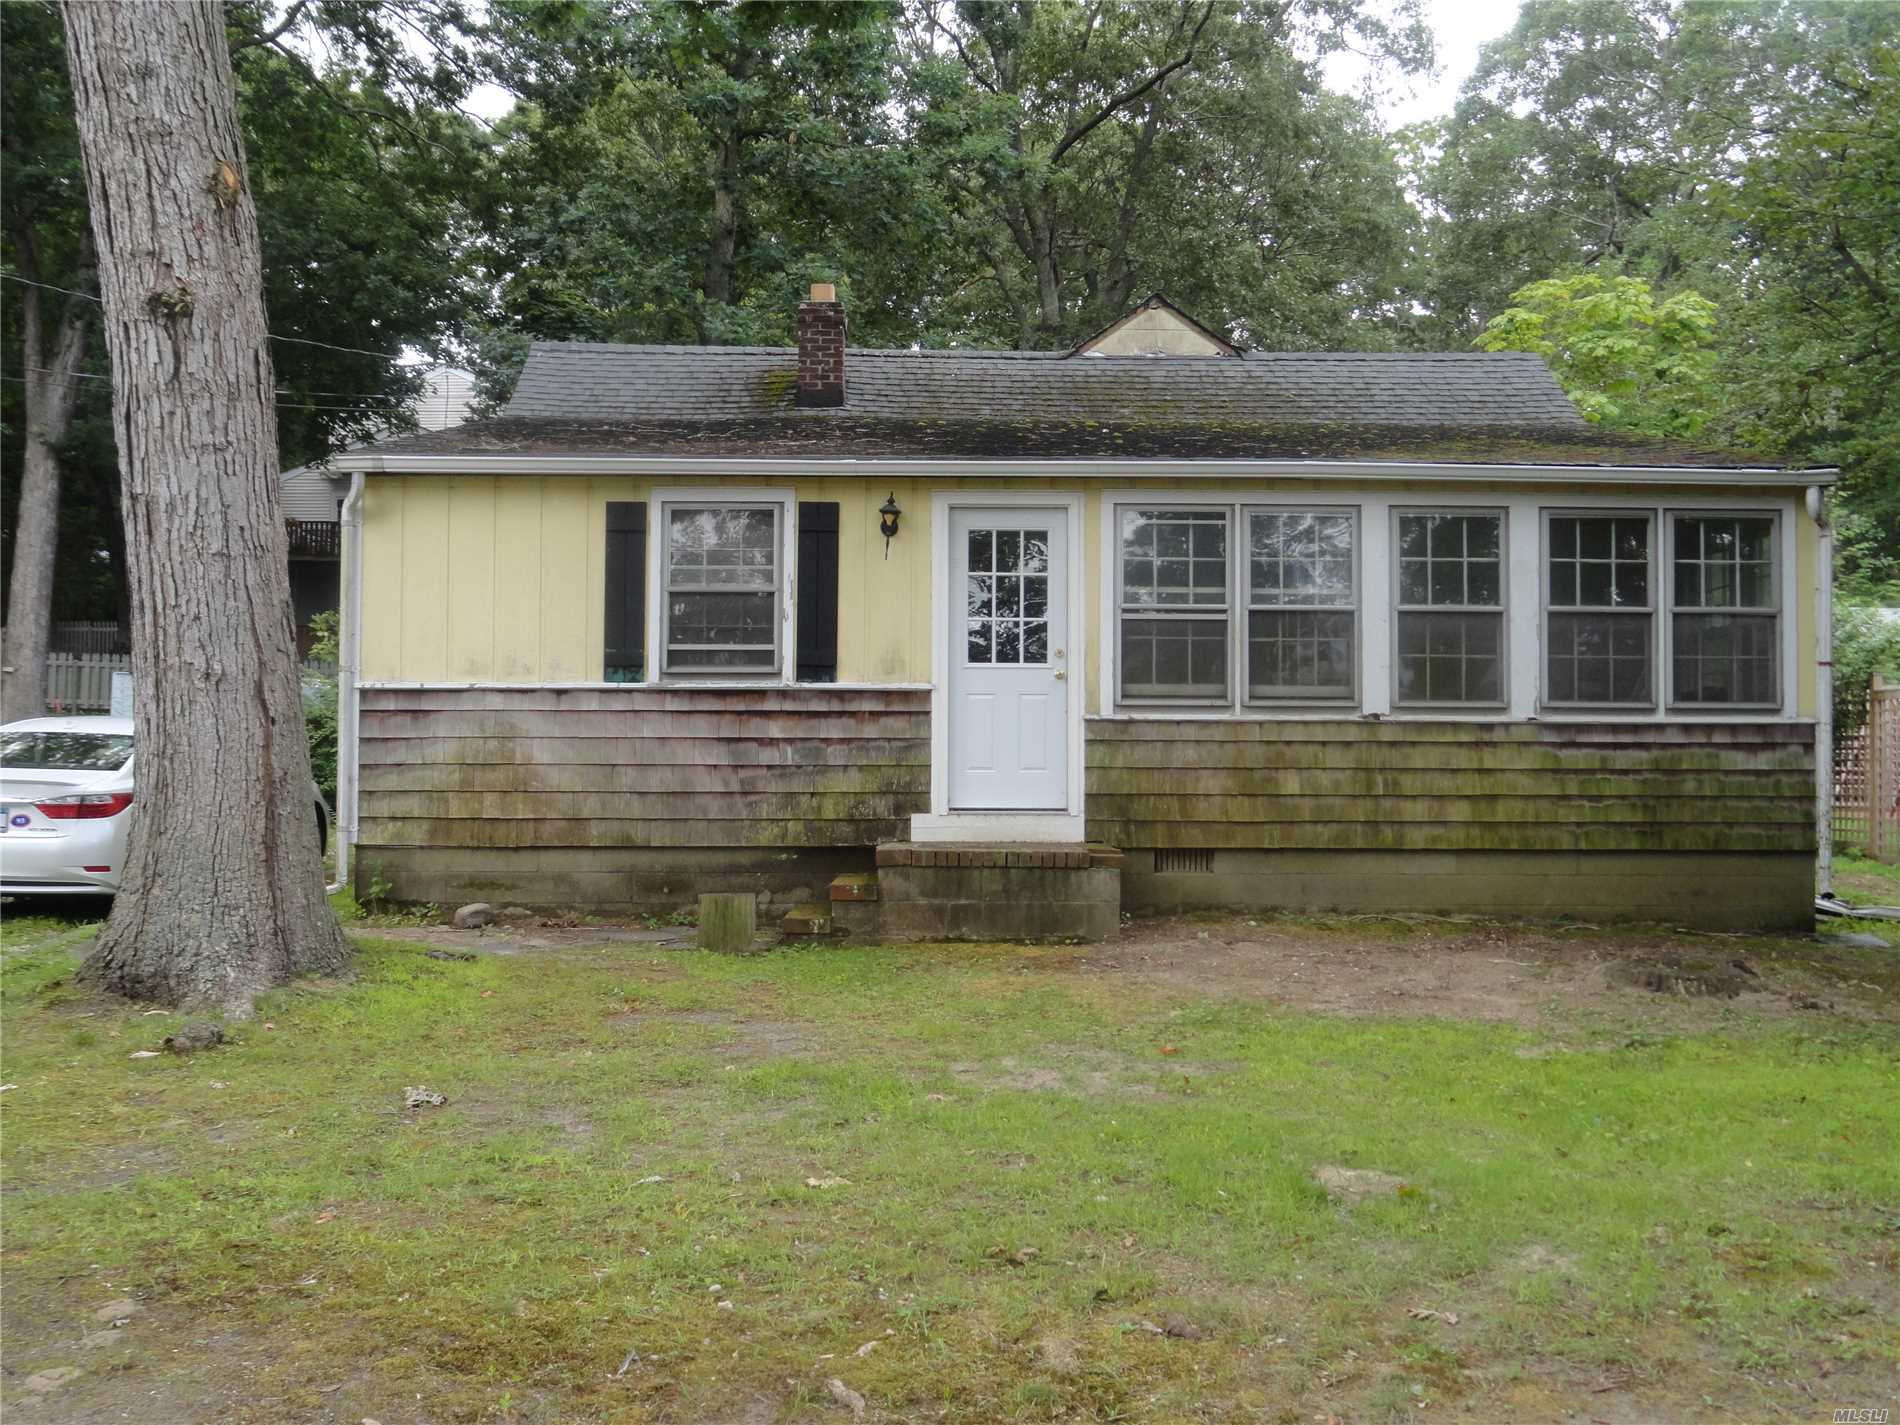 Fixer Upper - 1-1/2 Story Cottage With Partial Waterview Of Goose Creek; Deeded Access To Beach & Boating; Private Hoa. Living Room W/Fpl, Eik, 2 Bedrooms, 1 Bath On The First Floor. Second Floor Has A Bedroom And Small Loft Area. Enclosed Porch, Patio, Detached 1-Car Garage.